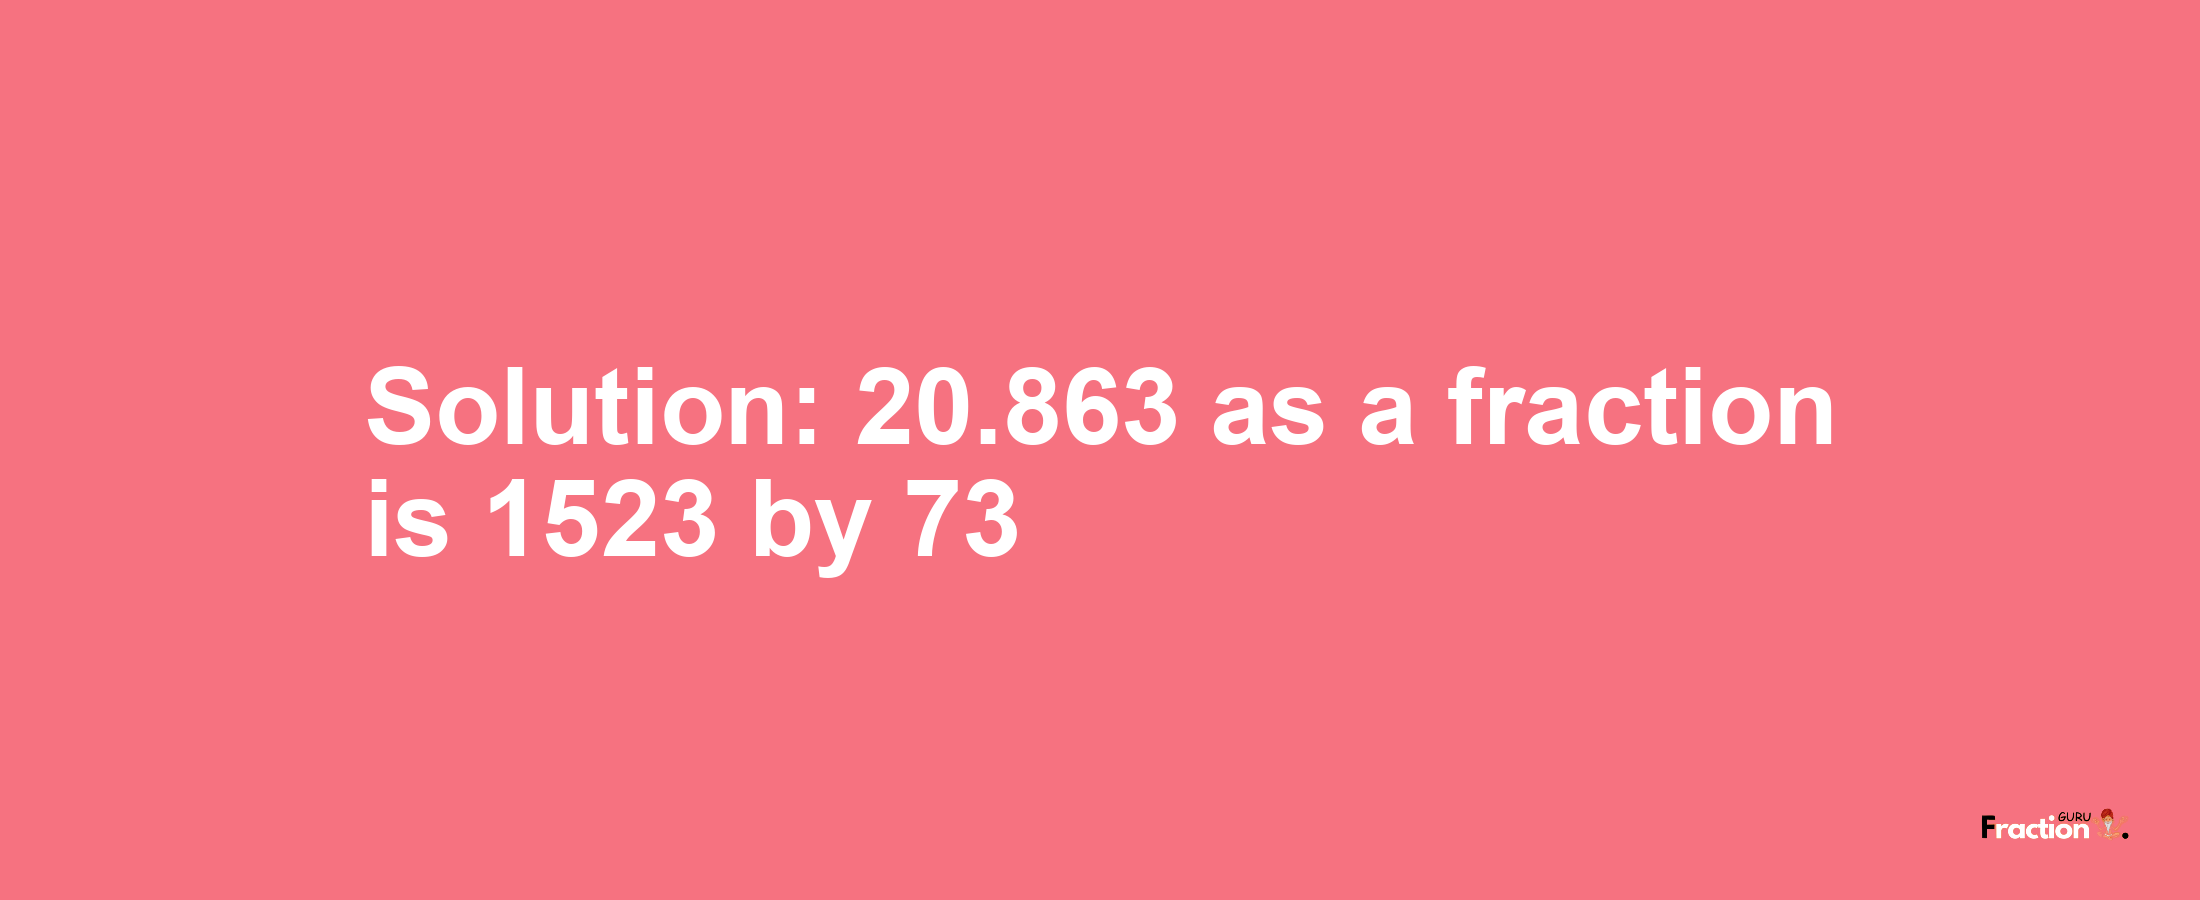 Solution:20.863 as a fraction is 1523/73